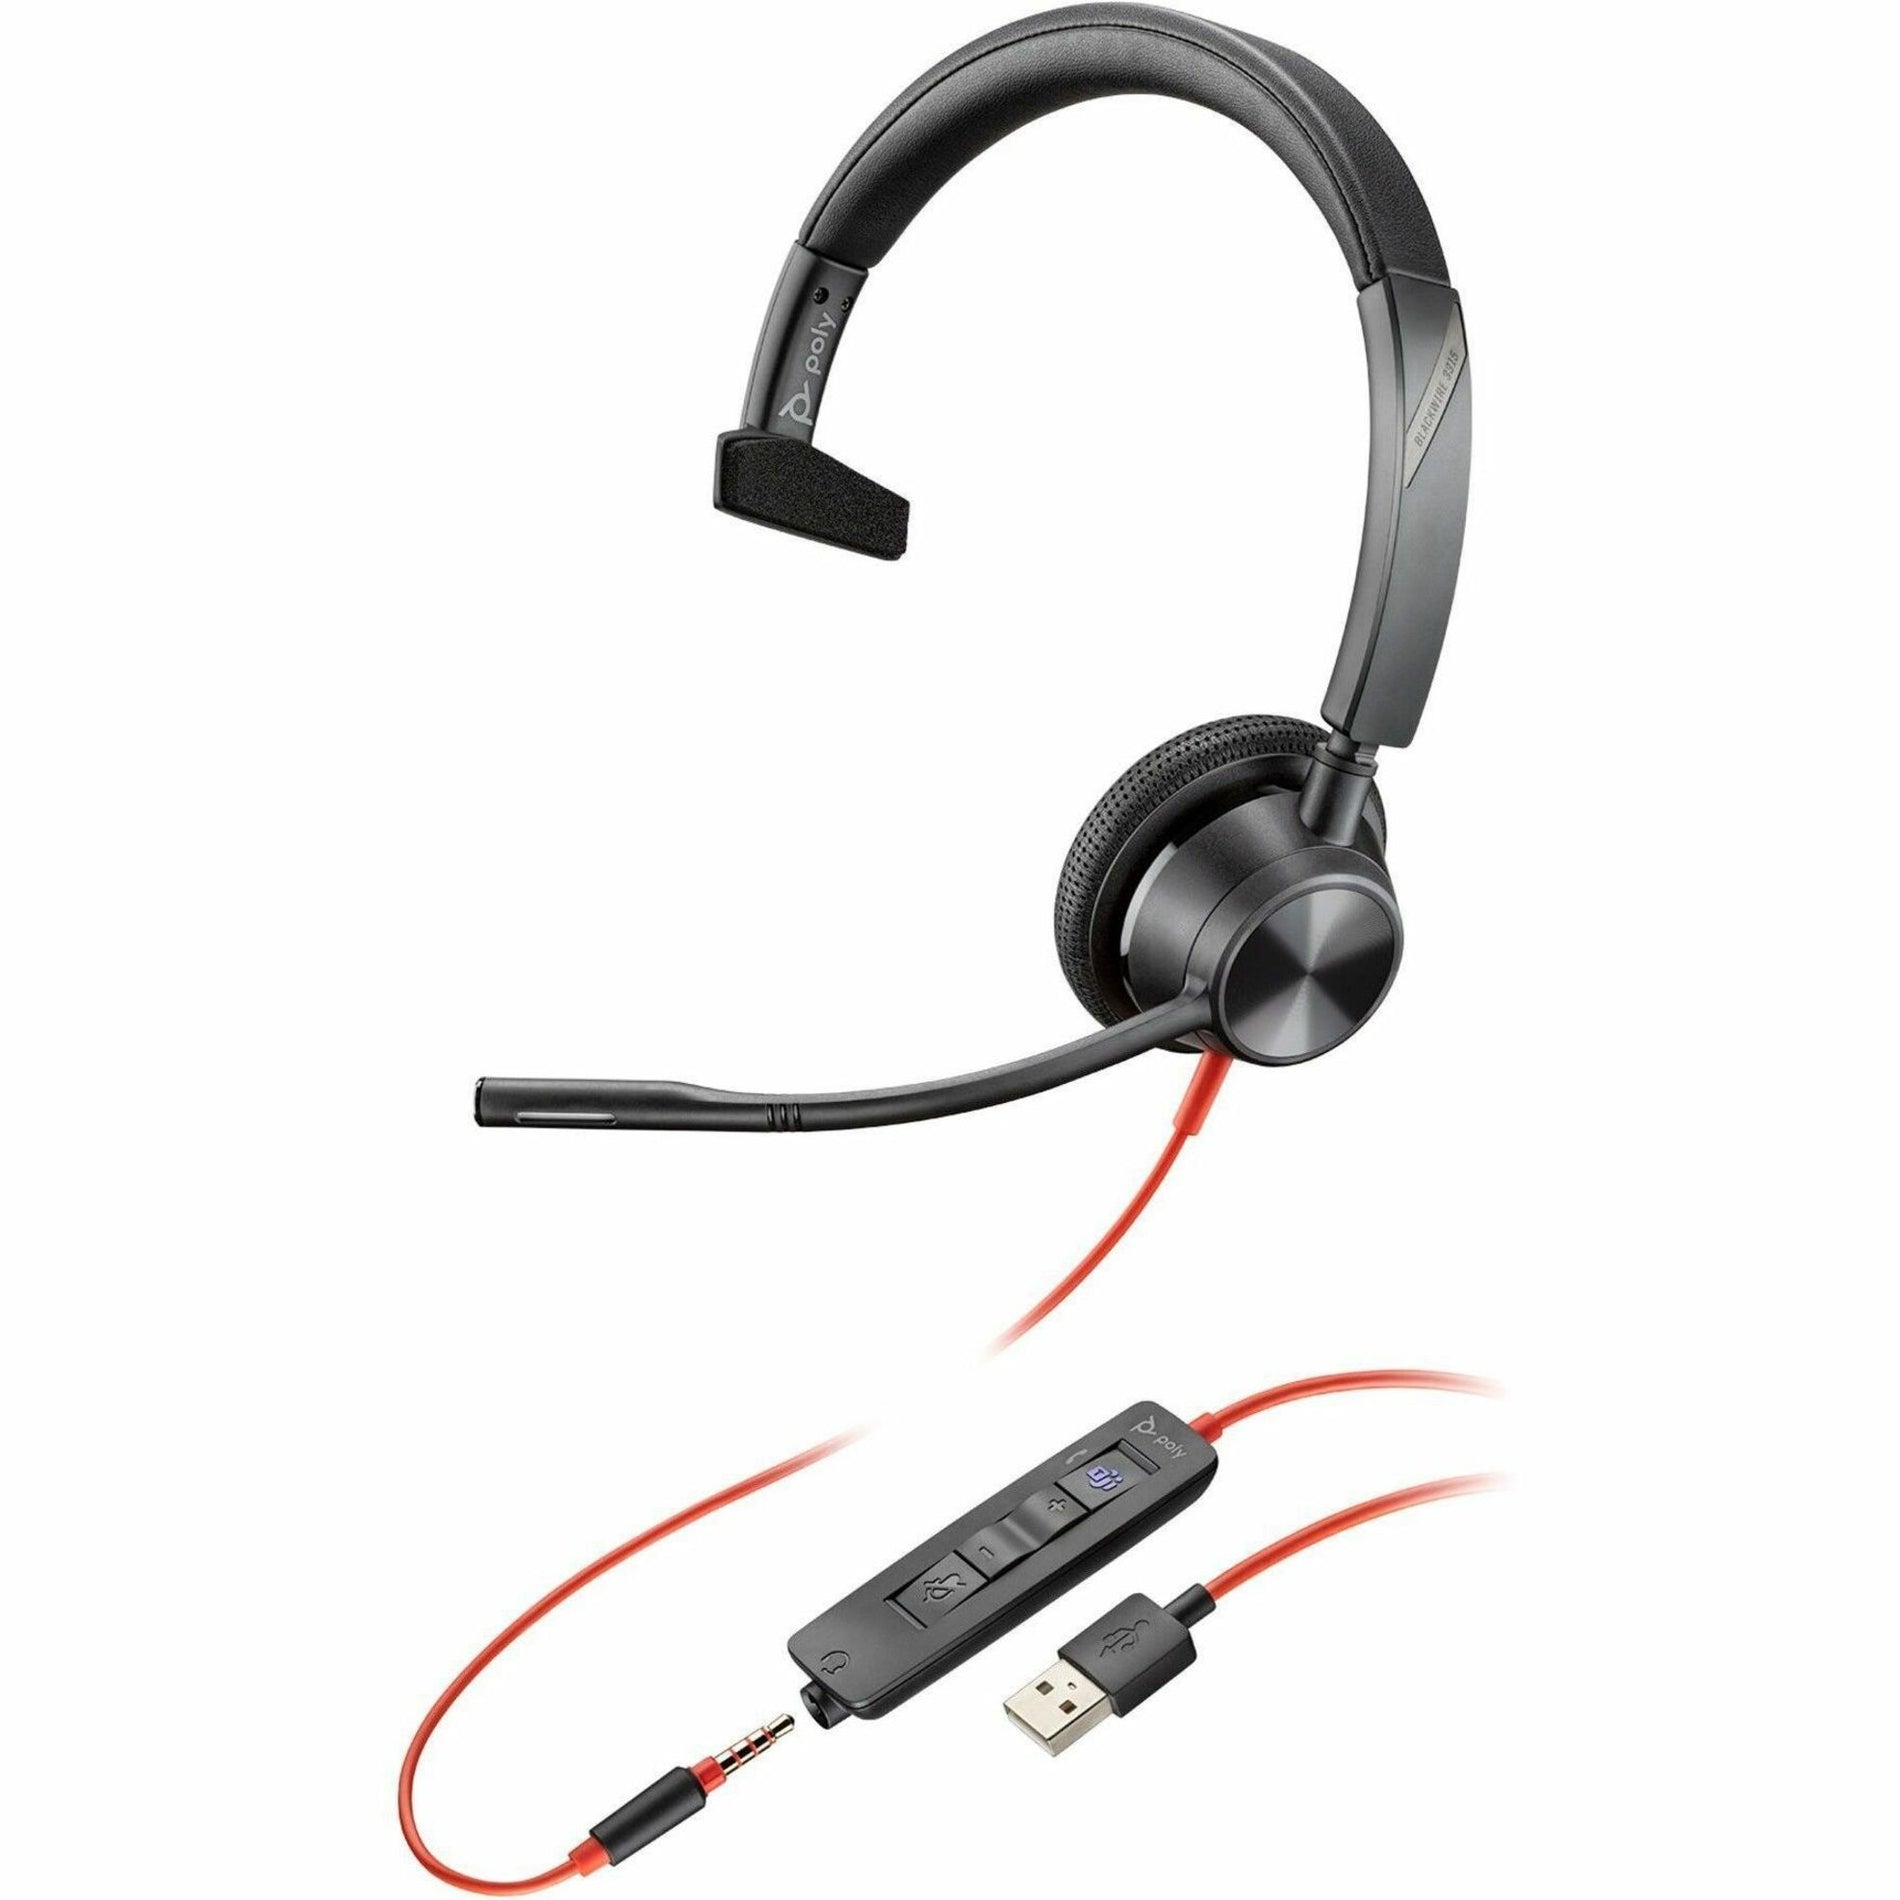 Poly 76J13AA Blackwire 3315 Headset, USB Type A and 3.5mm Wired, Mono Sound, Noise Reduction